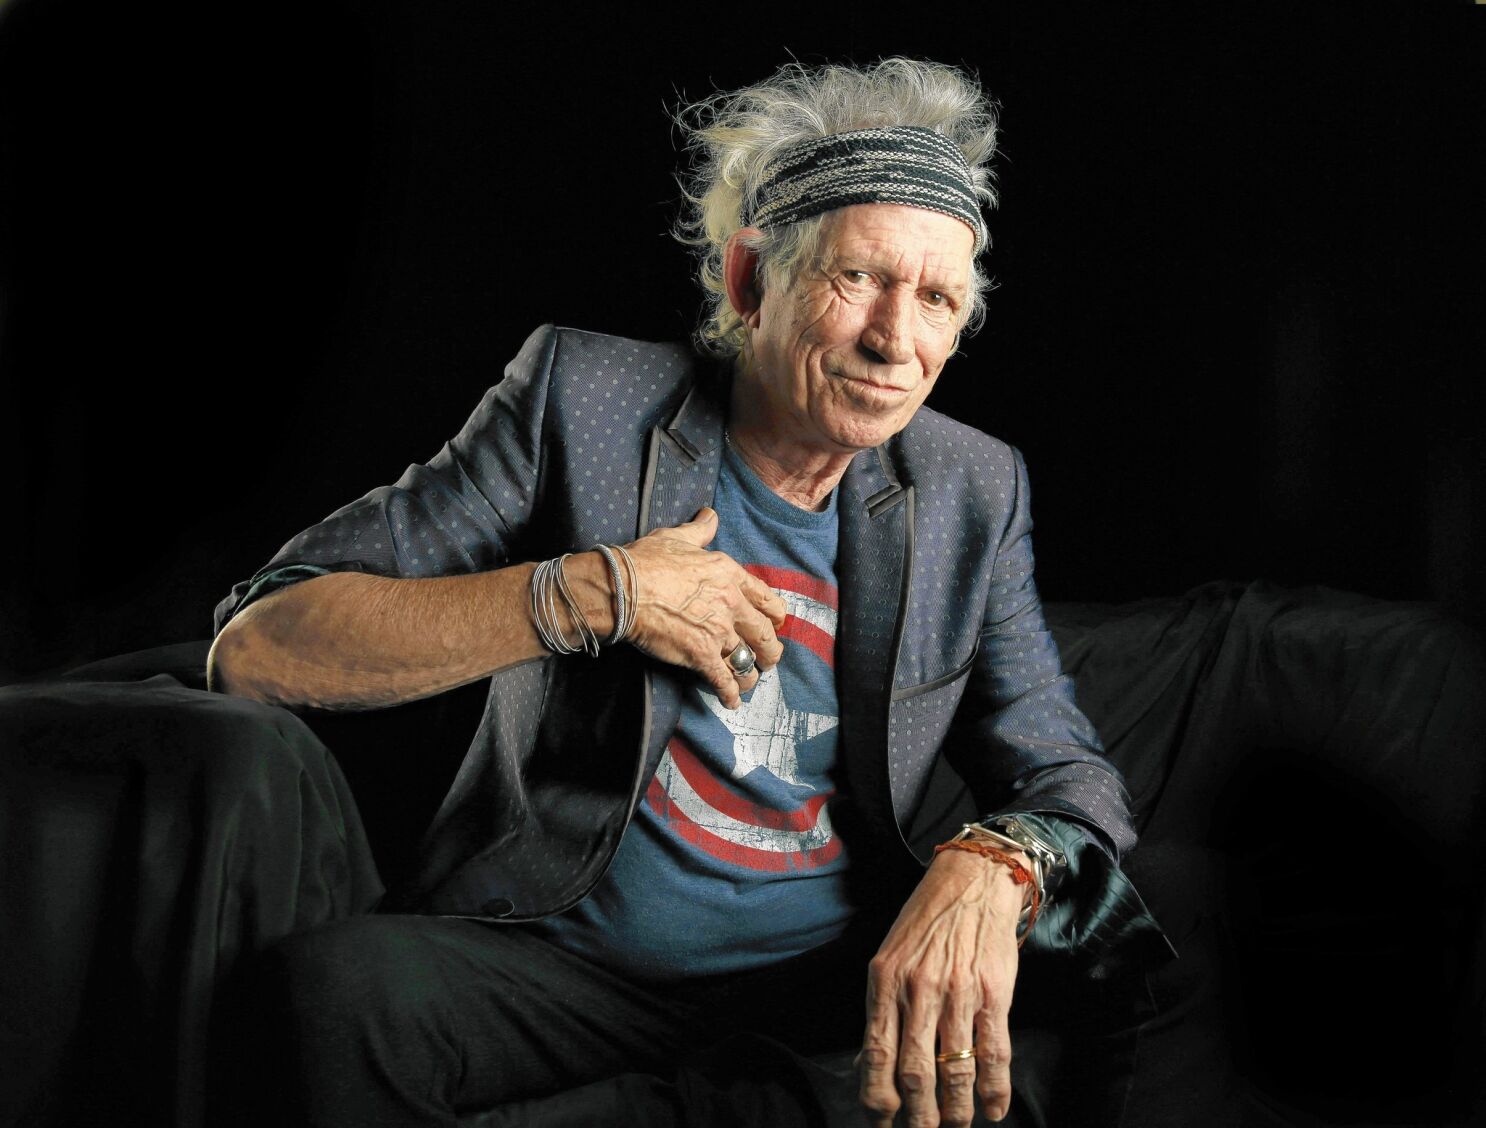 celebrities who are good people - keith richards rolling stones